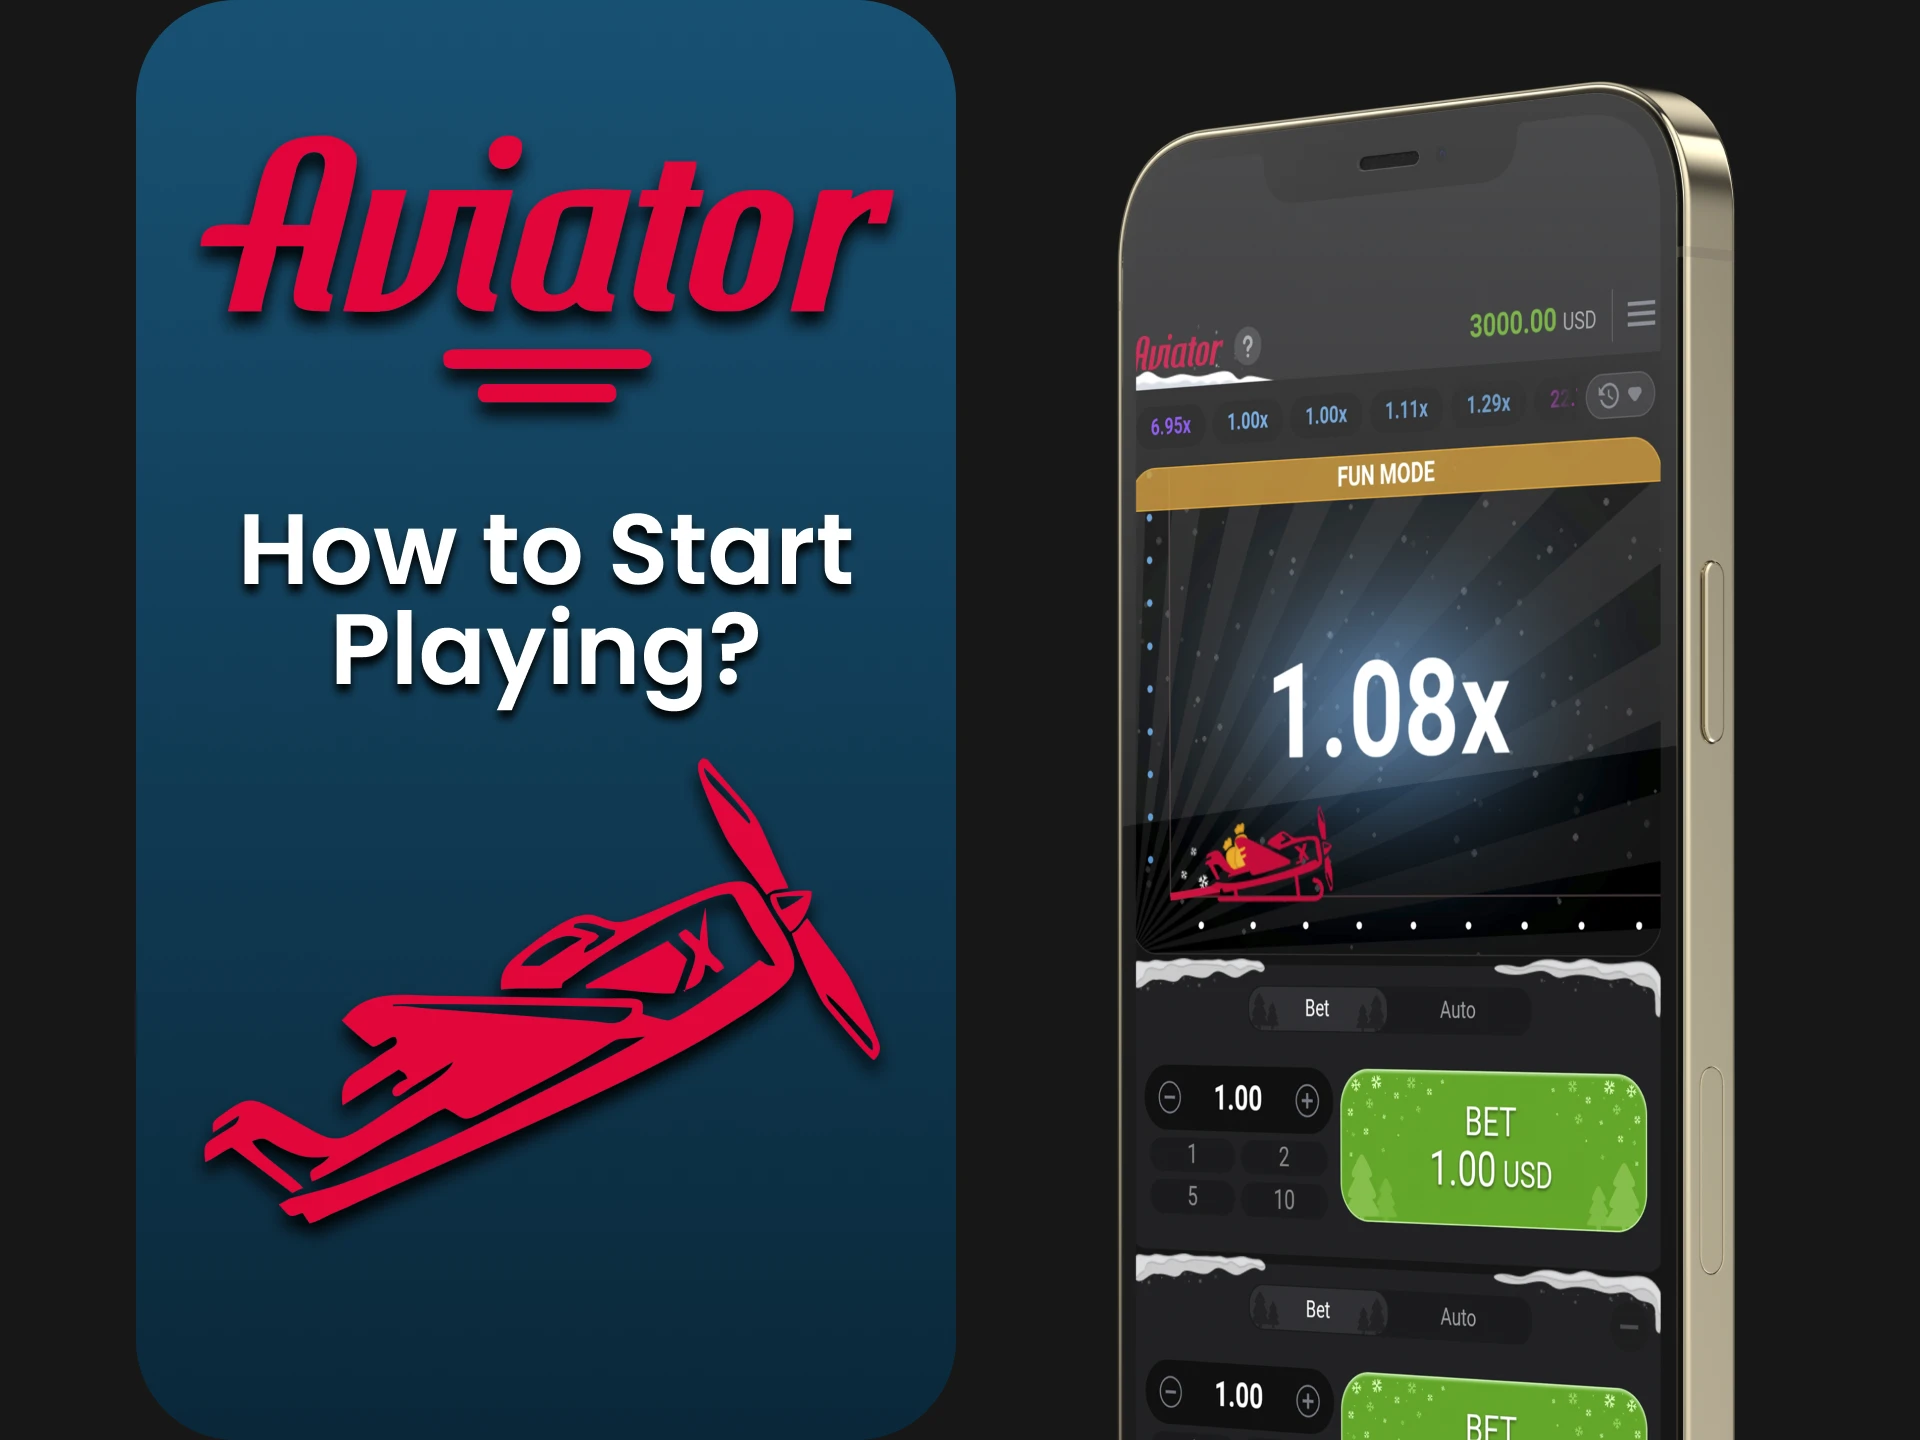 We'll give you advice on how to start playing Aviator using Predictor.